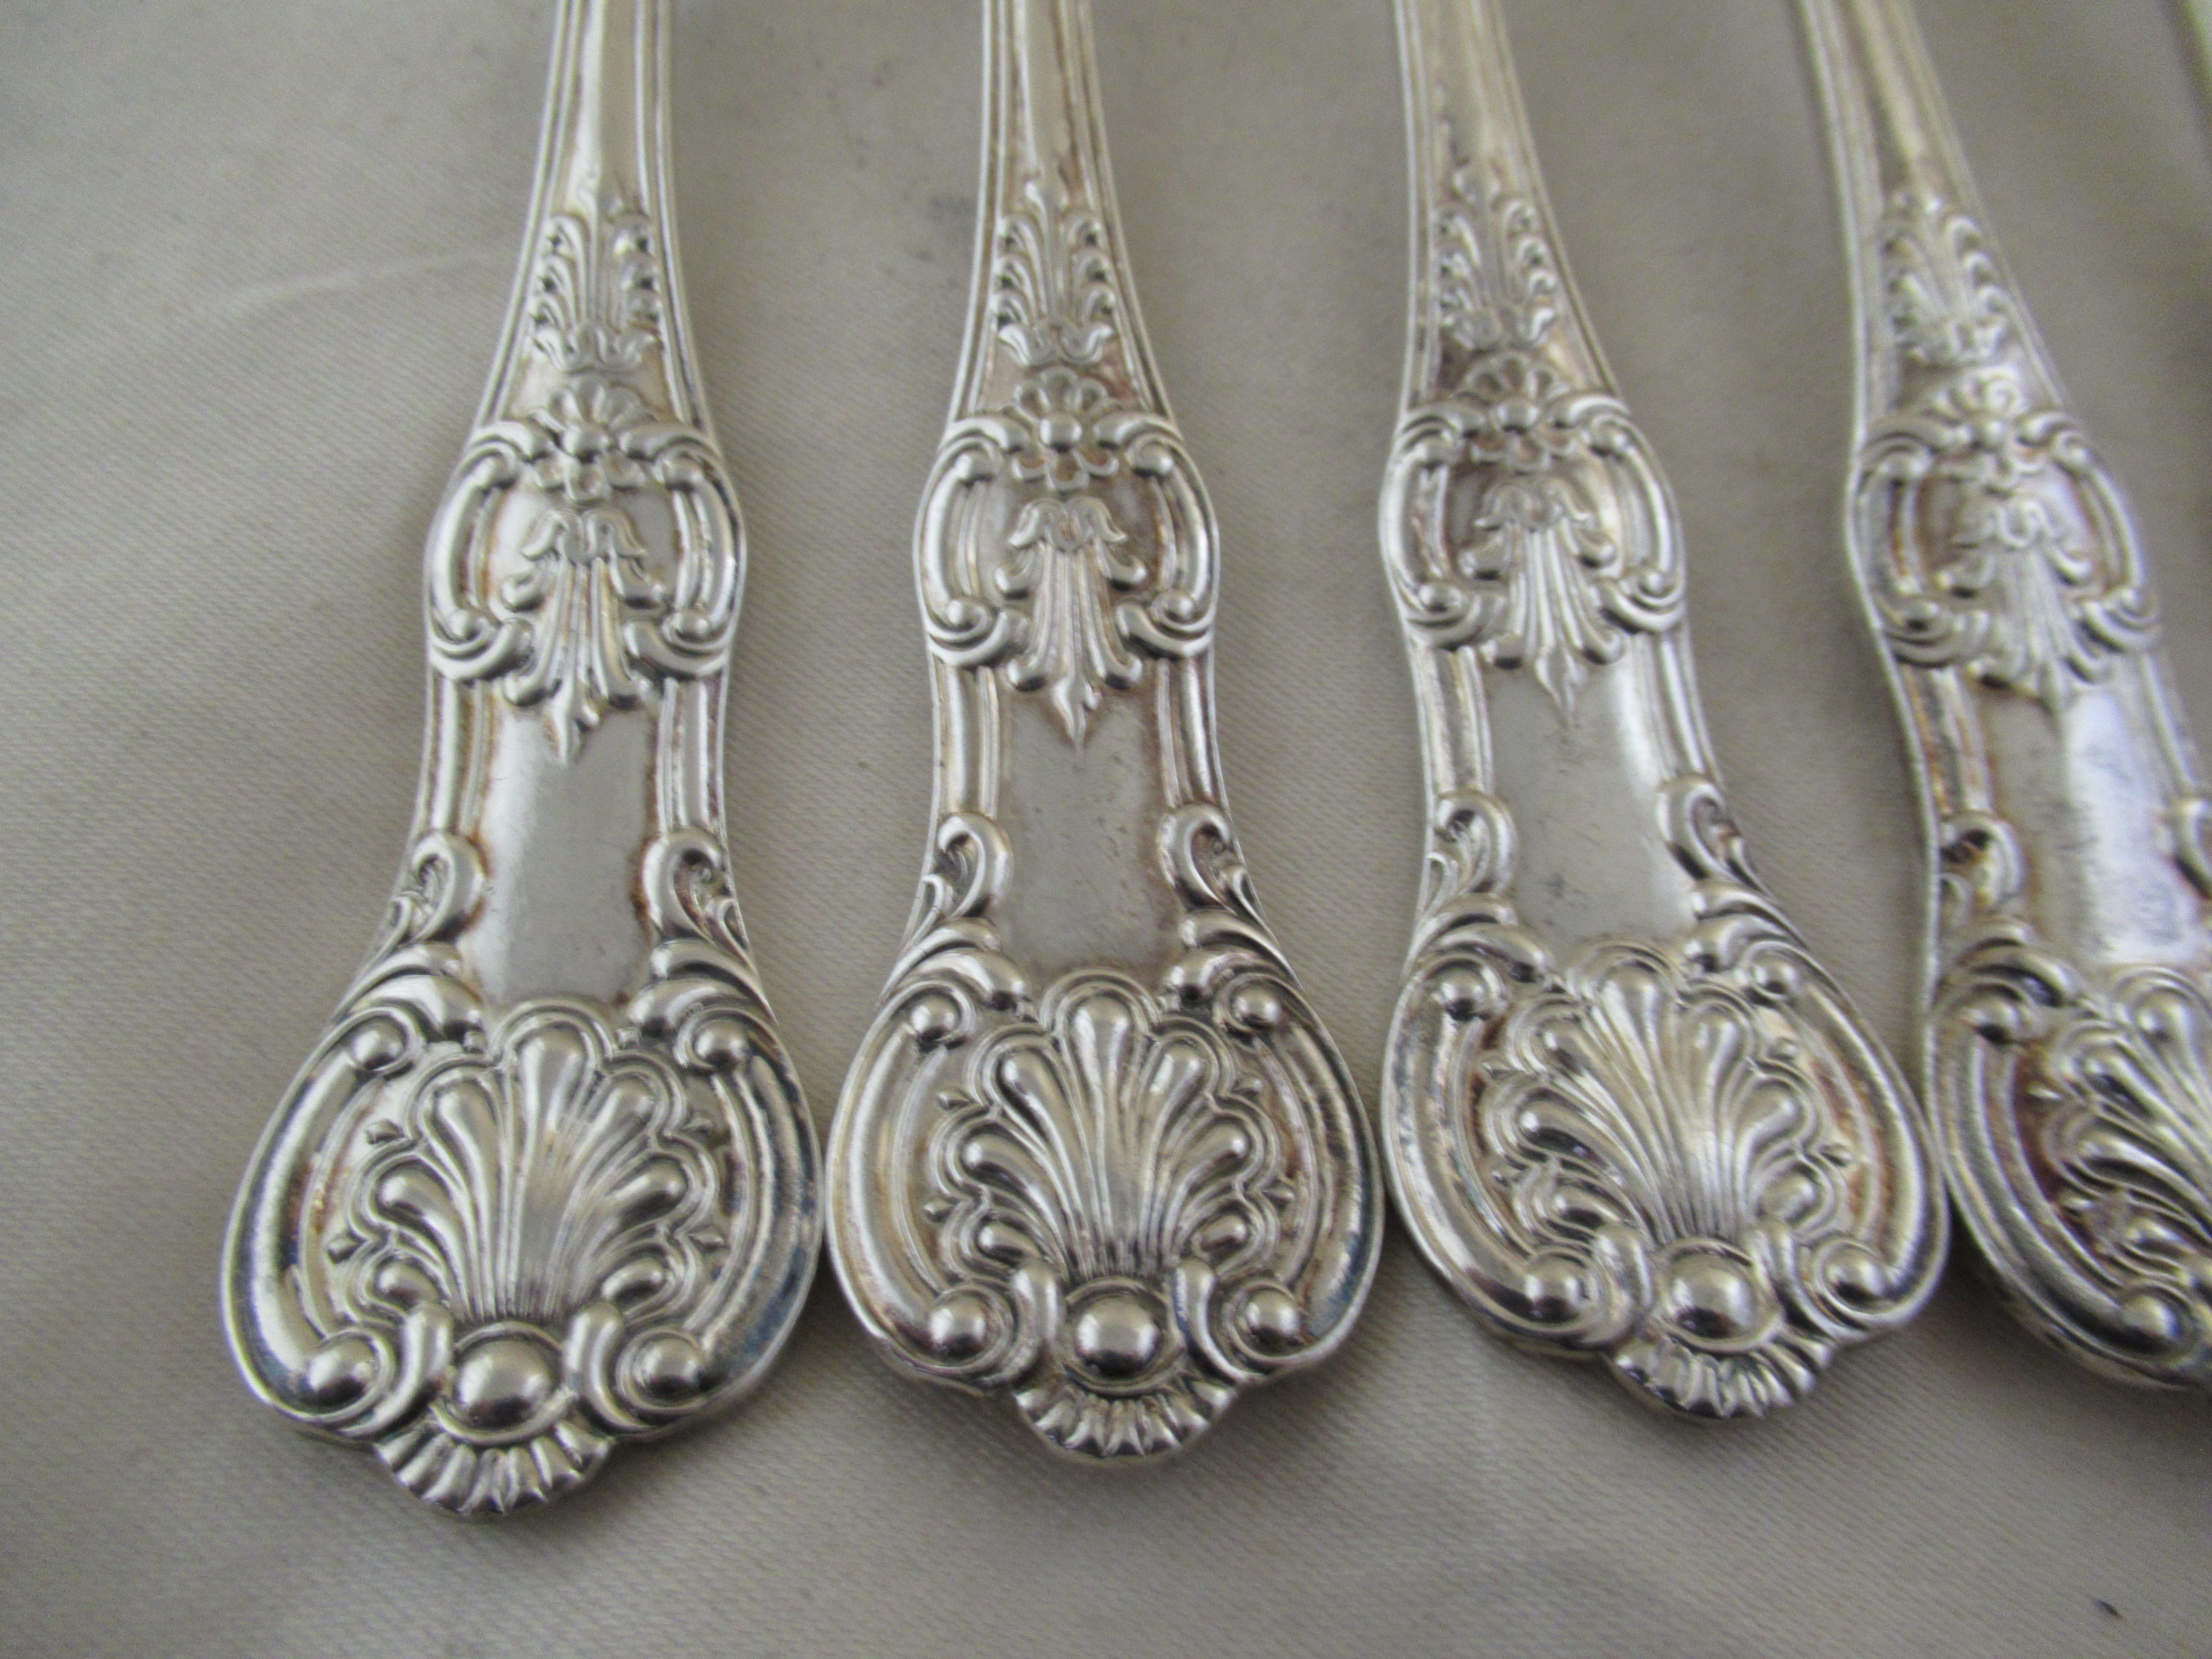 Sterling silver set of 6 kings pattern table forks
All 6 pieces are stamped with a full English hallmark,
 applied by the Sheffield Assay Office:-
 Lower case m - Date letter for Sheffield 1904
 Lion - Sterling silver quality guarantee 
 Crown